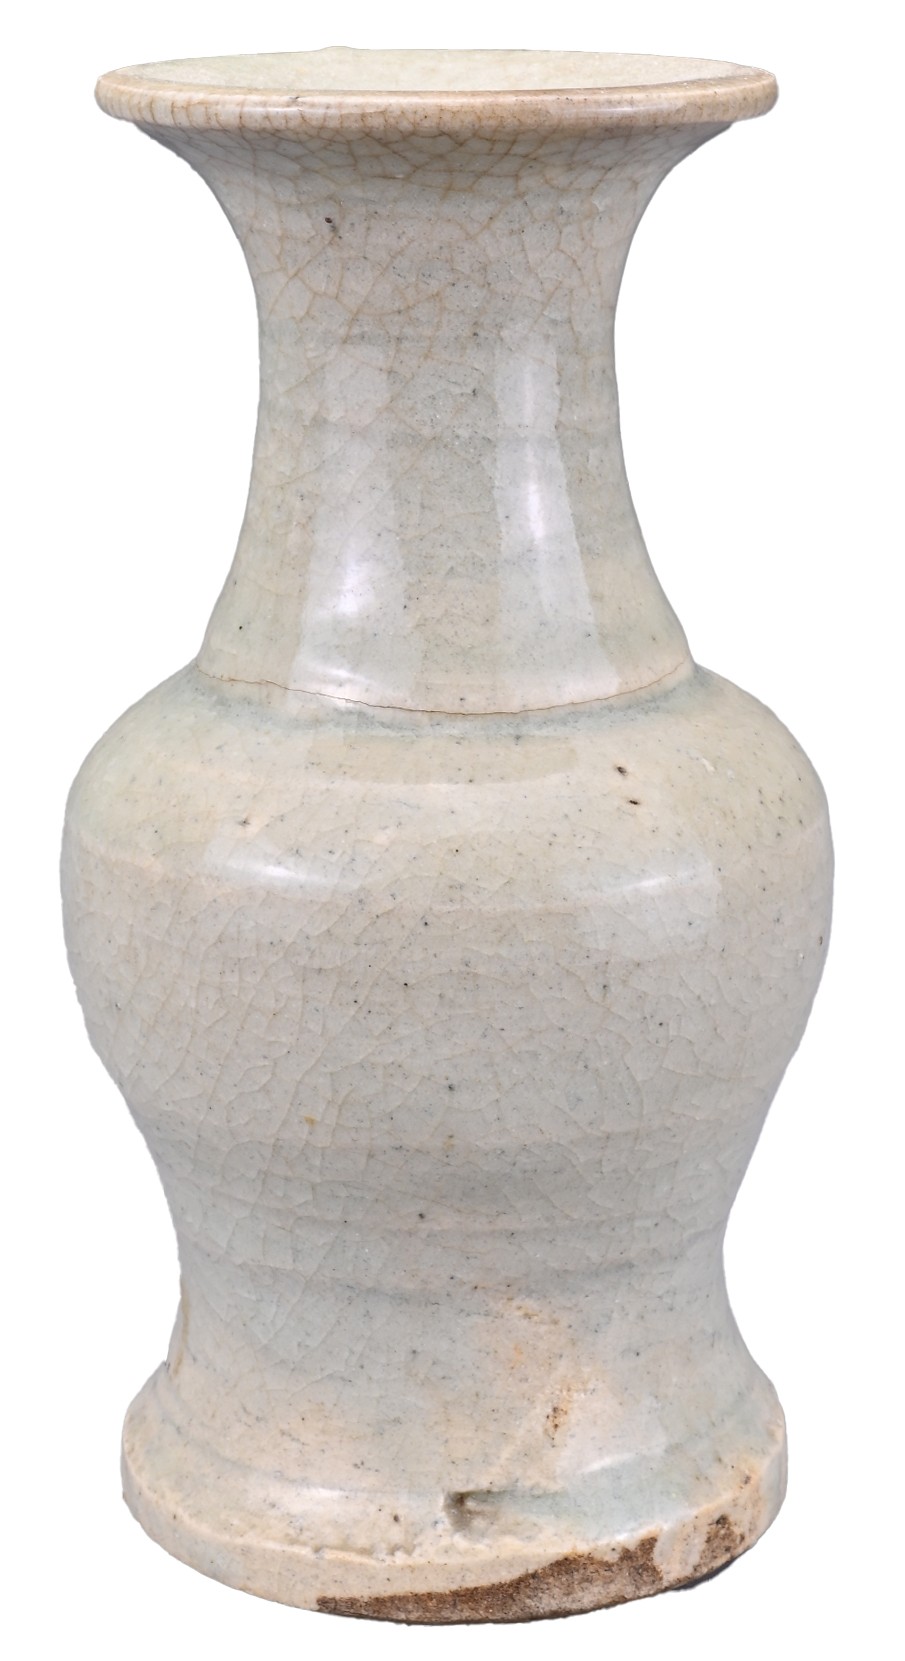 A CHINESE PALE CELADON VASE, LATE MING DYNASTY. Heavily potted with visible crackle throughout. 14.